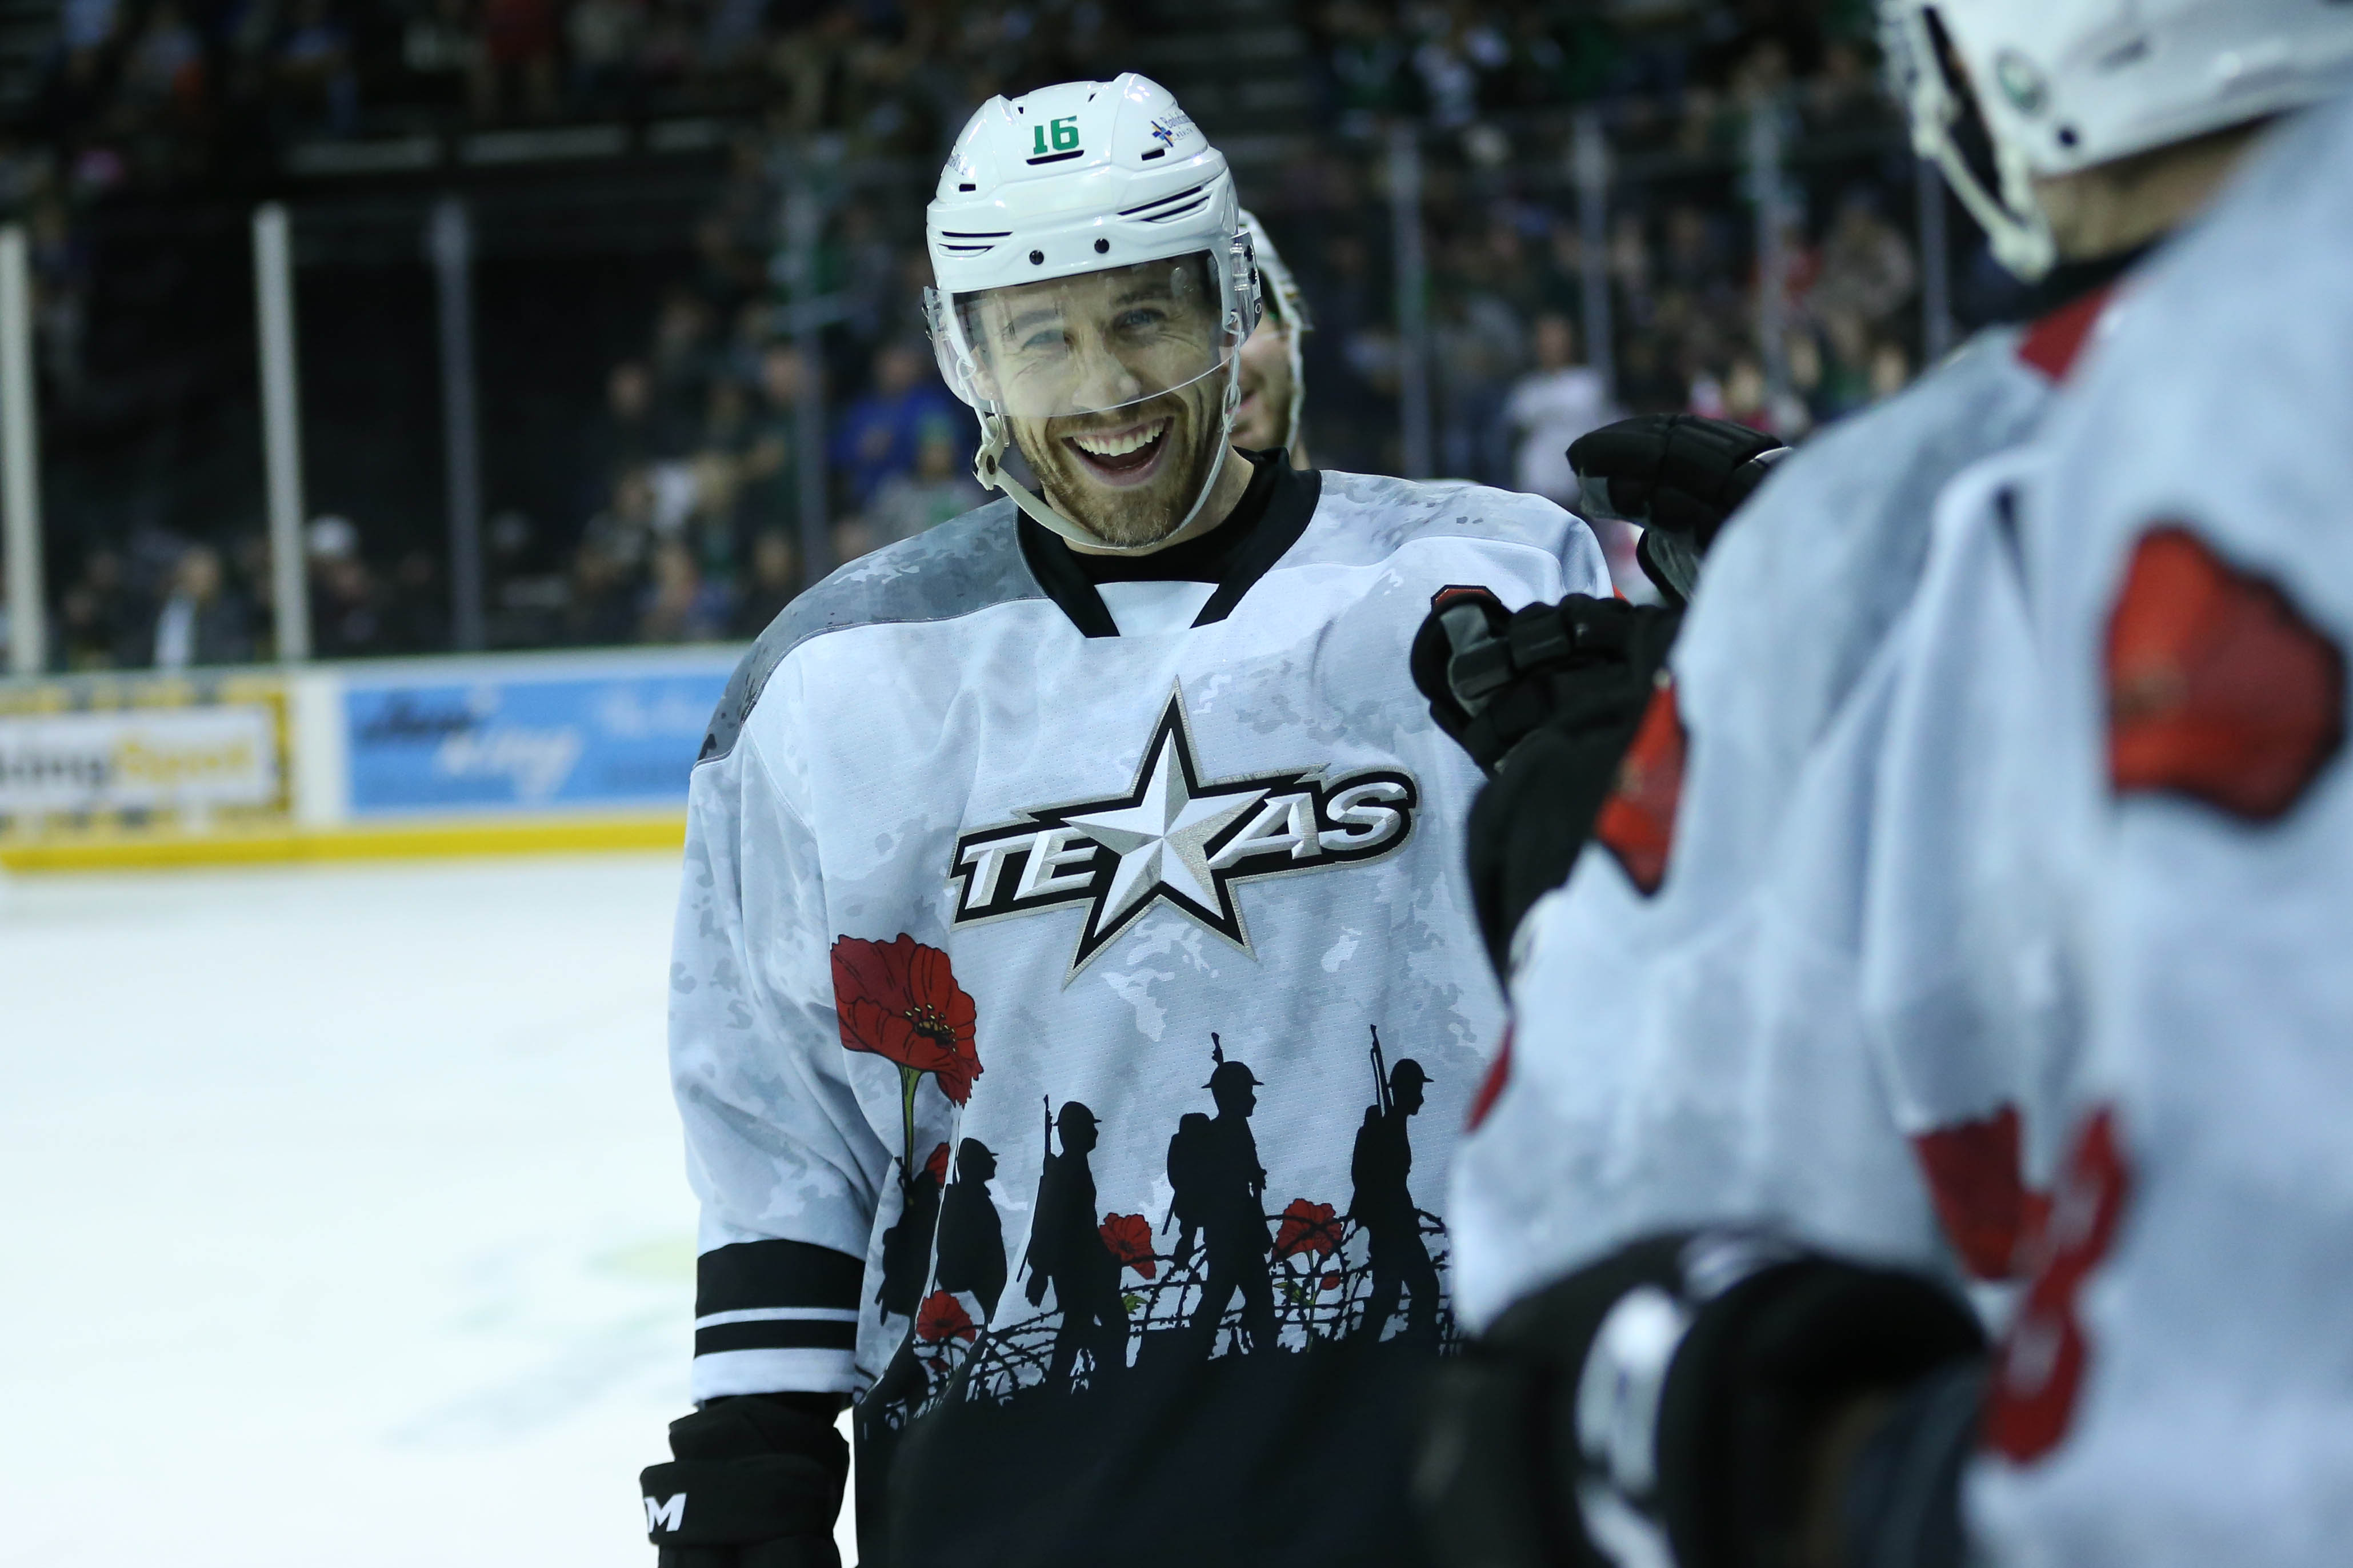 Dallas Stars Xtreme Team boosts youth hockey in Texas and beyond